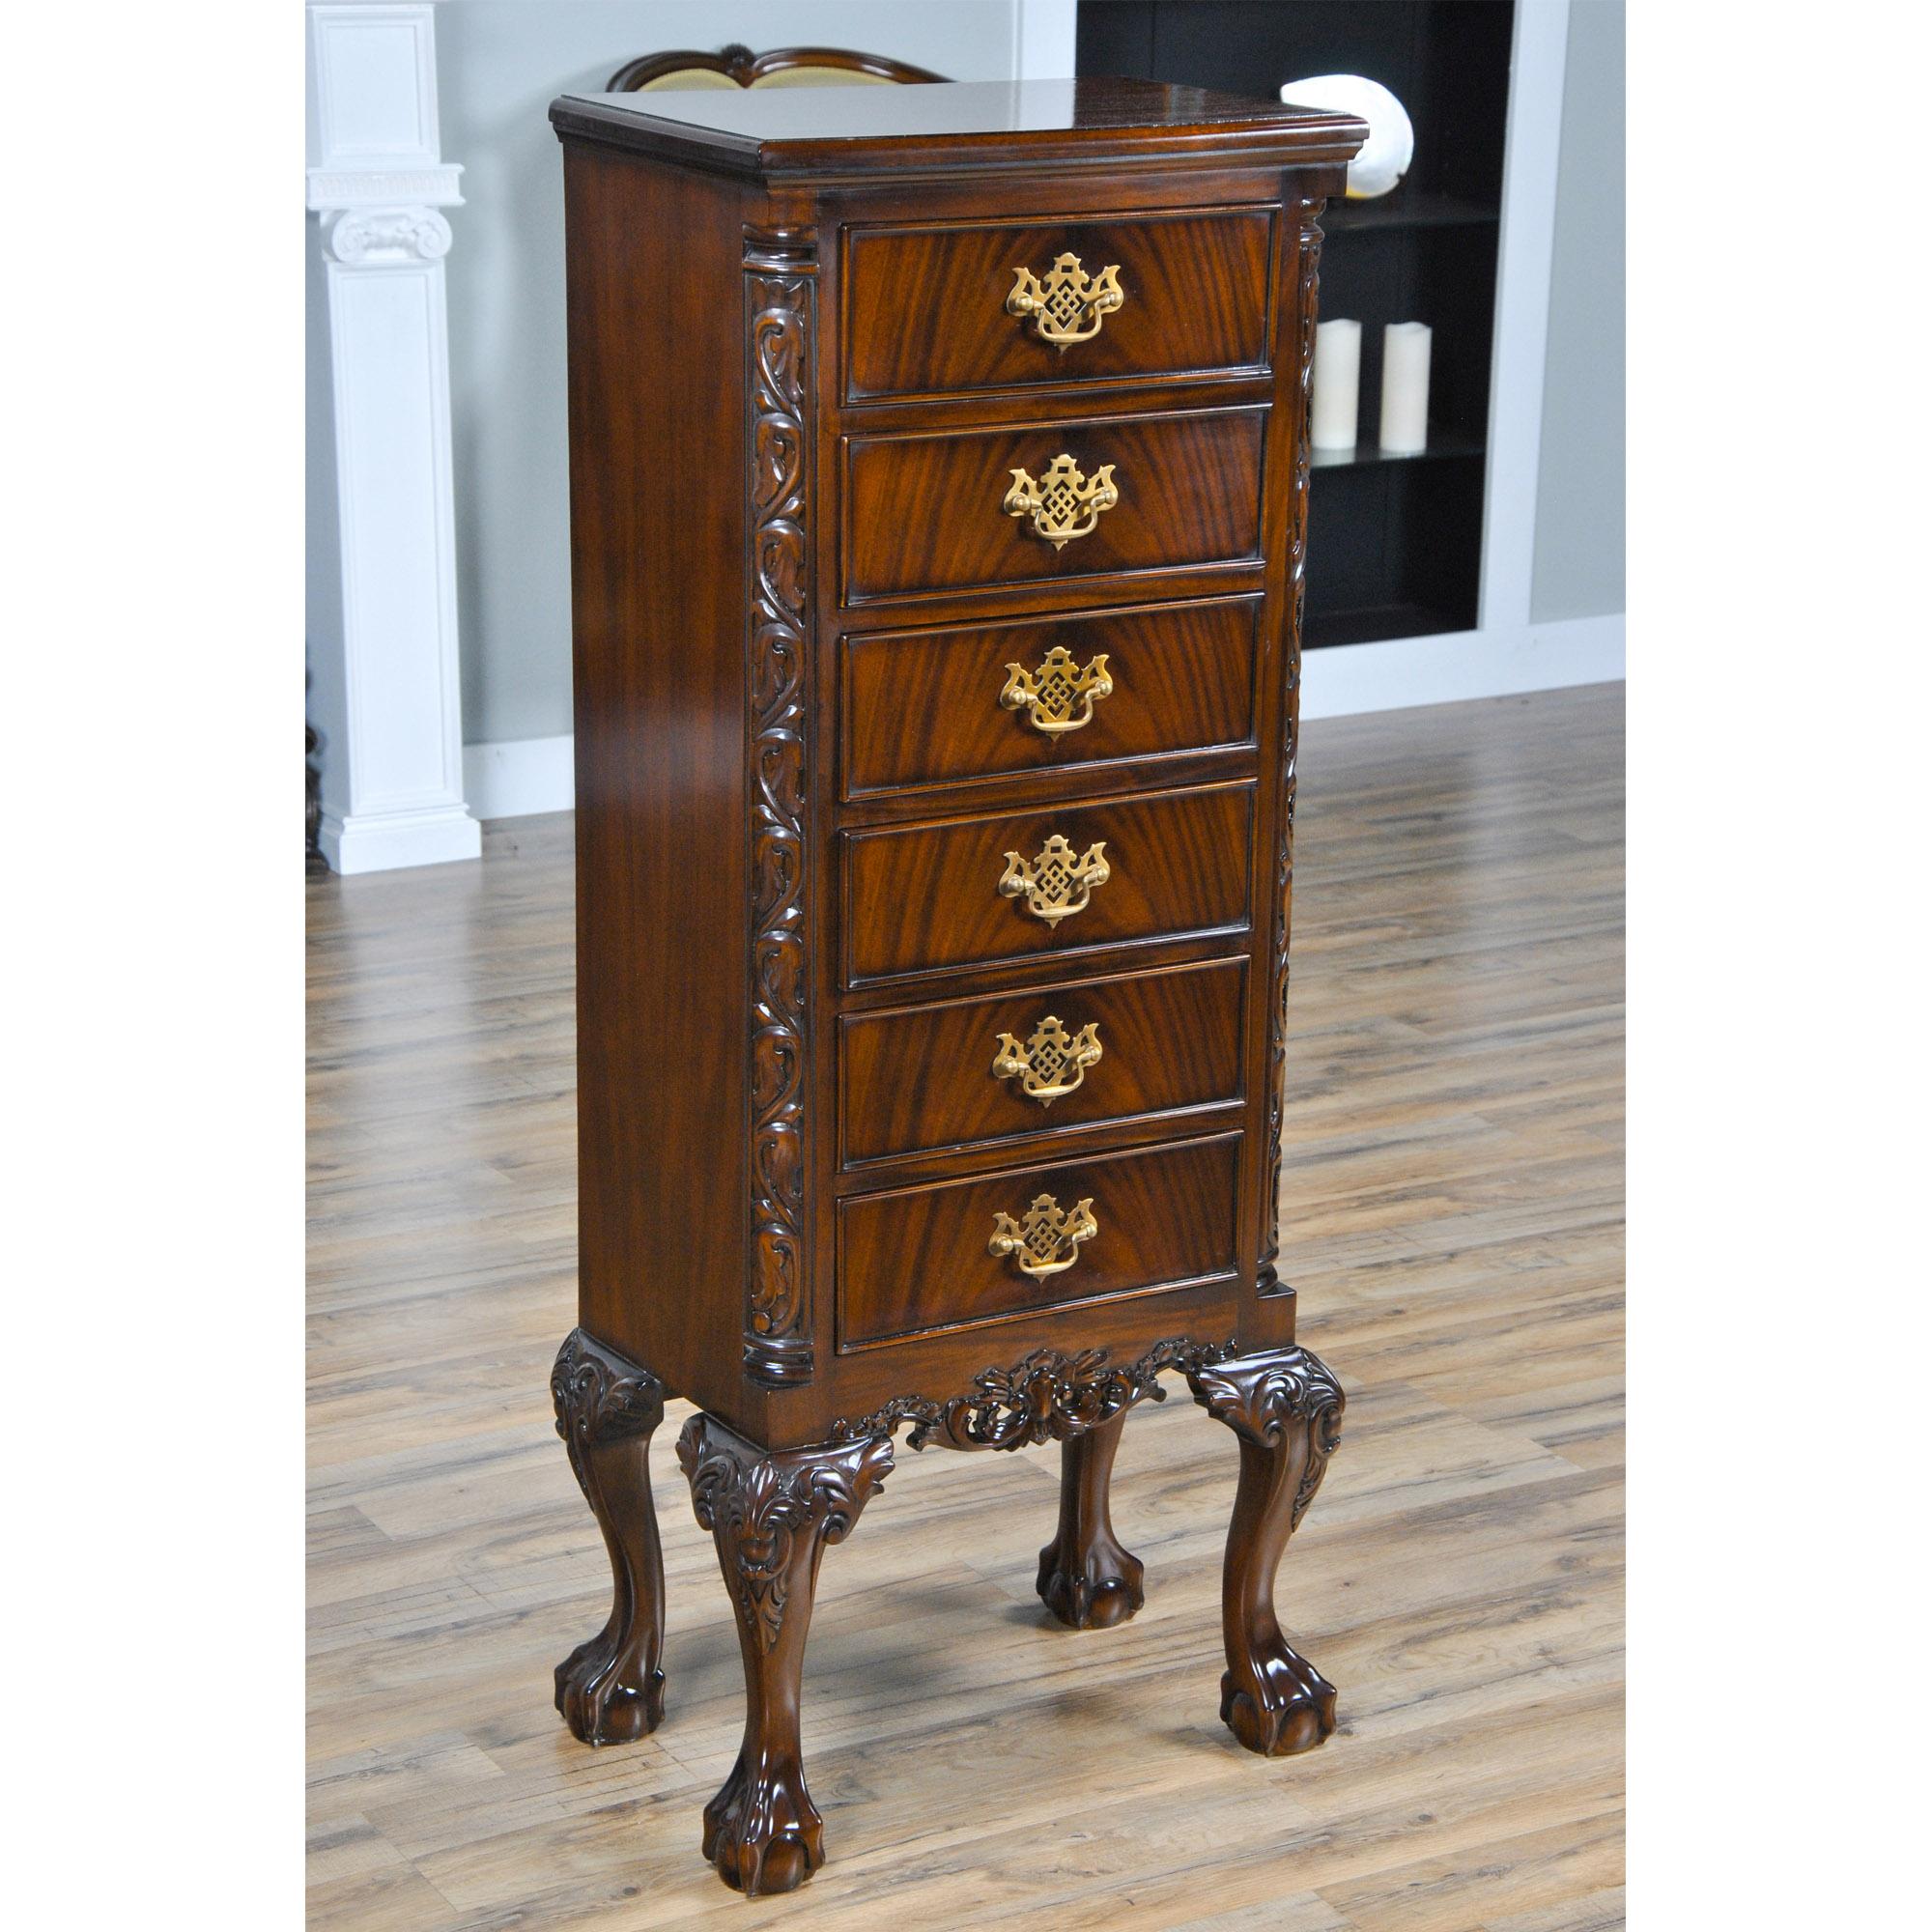 This six drawer chest was originally designed as a lingerie chest but it can be used for storing a lot of just about anything! Hard to find vertical storage, all on beautifully shaped, hand carved, plantation grown solid mahogany cabriole